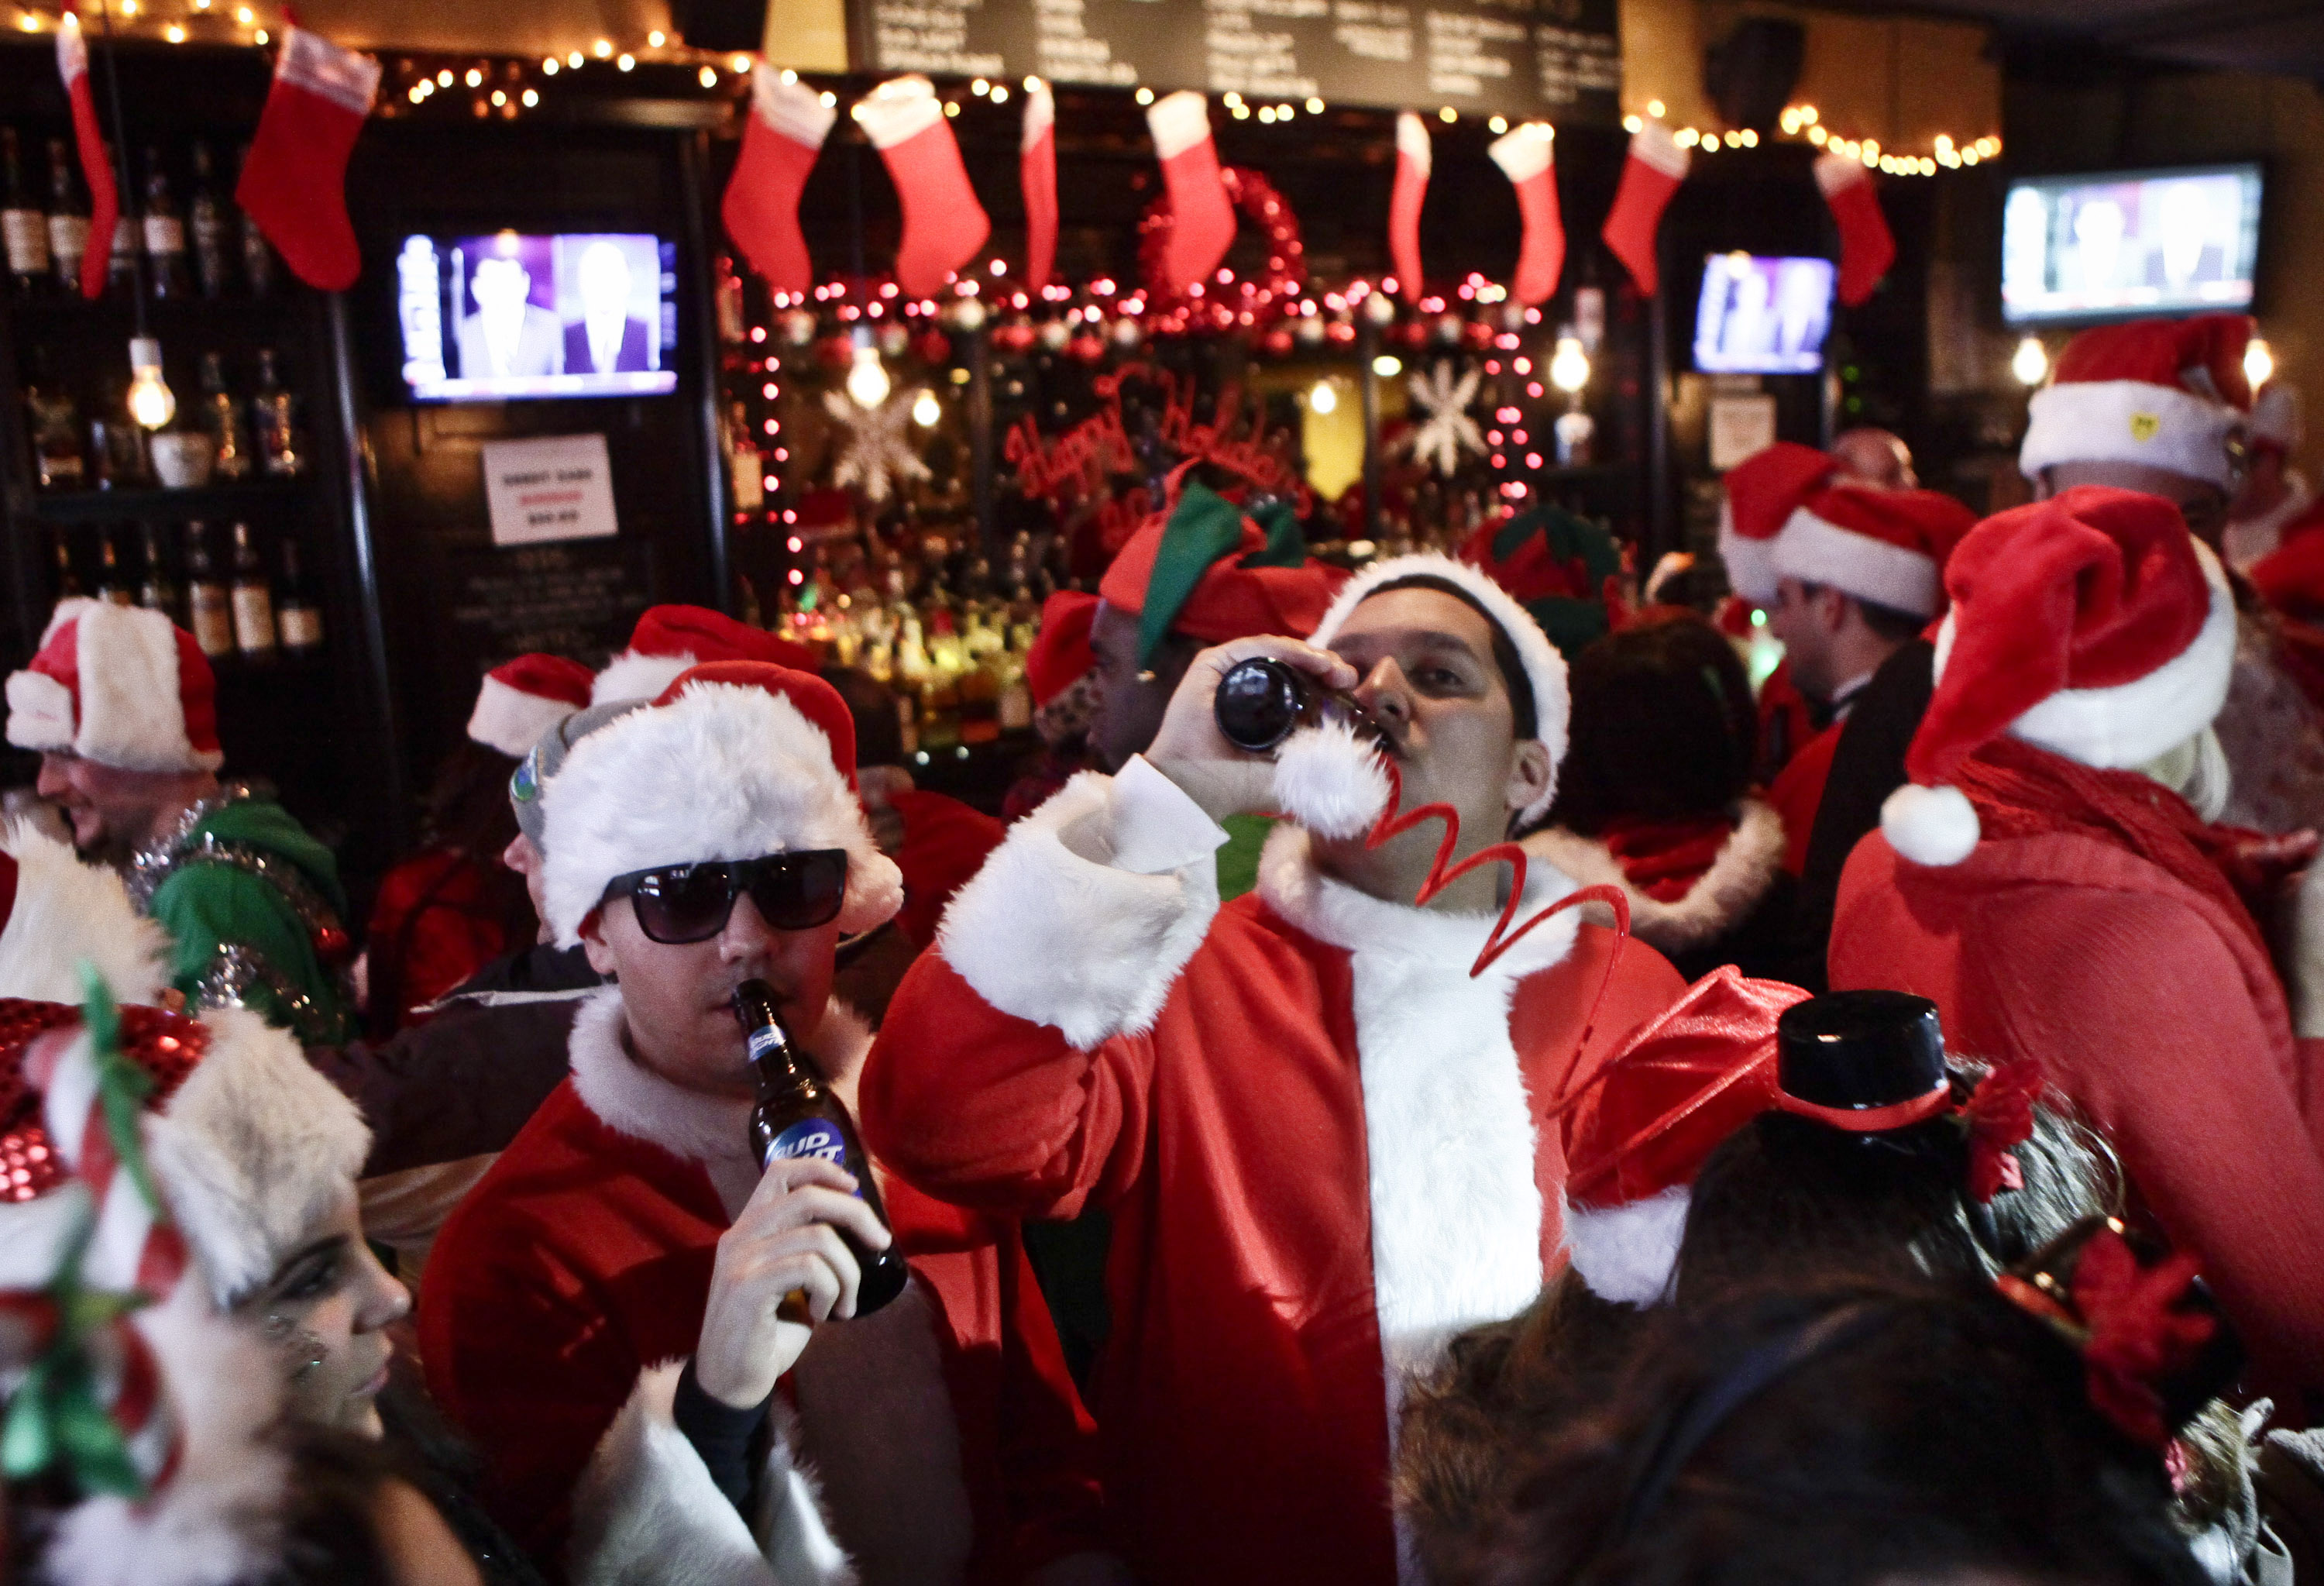 Revelers dressed as Santa Claus drink inside at a bar in the East Village neighborhood during the annual SantaCon bar crawl event on December 14, 2013 in New York City. The SantaCon annual event occurs worldwide in more than 300 cities in 44 countries. In New York some community groups have established a 'Santa Free' zone that urges bars not to serve alcoholic beverages to people participating in order to dissuade incidents of public vomiting and urination in the streets. (Photo by Kena Betancur/Getty Images) (Kena Betancur&mdash;Getty Images)